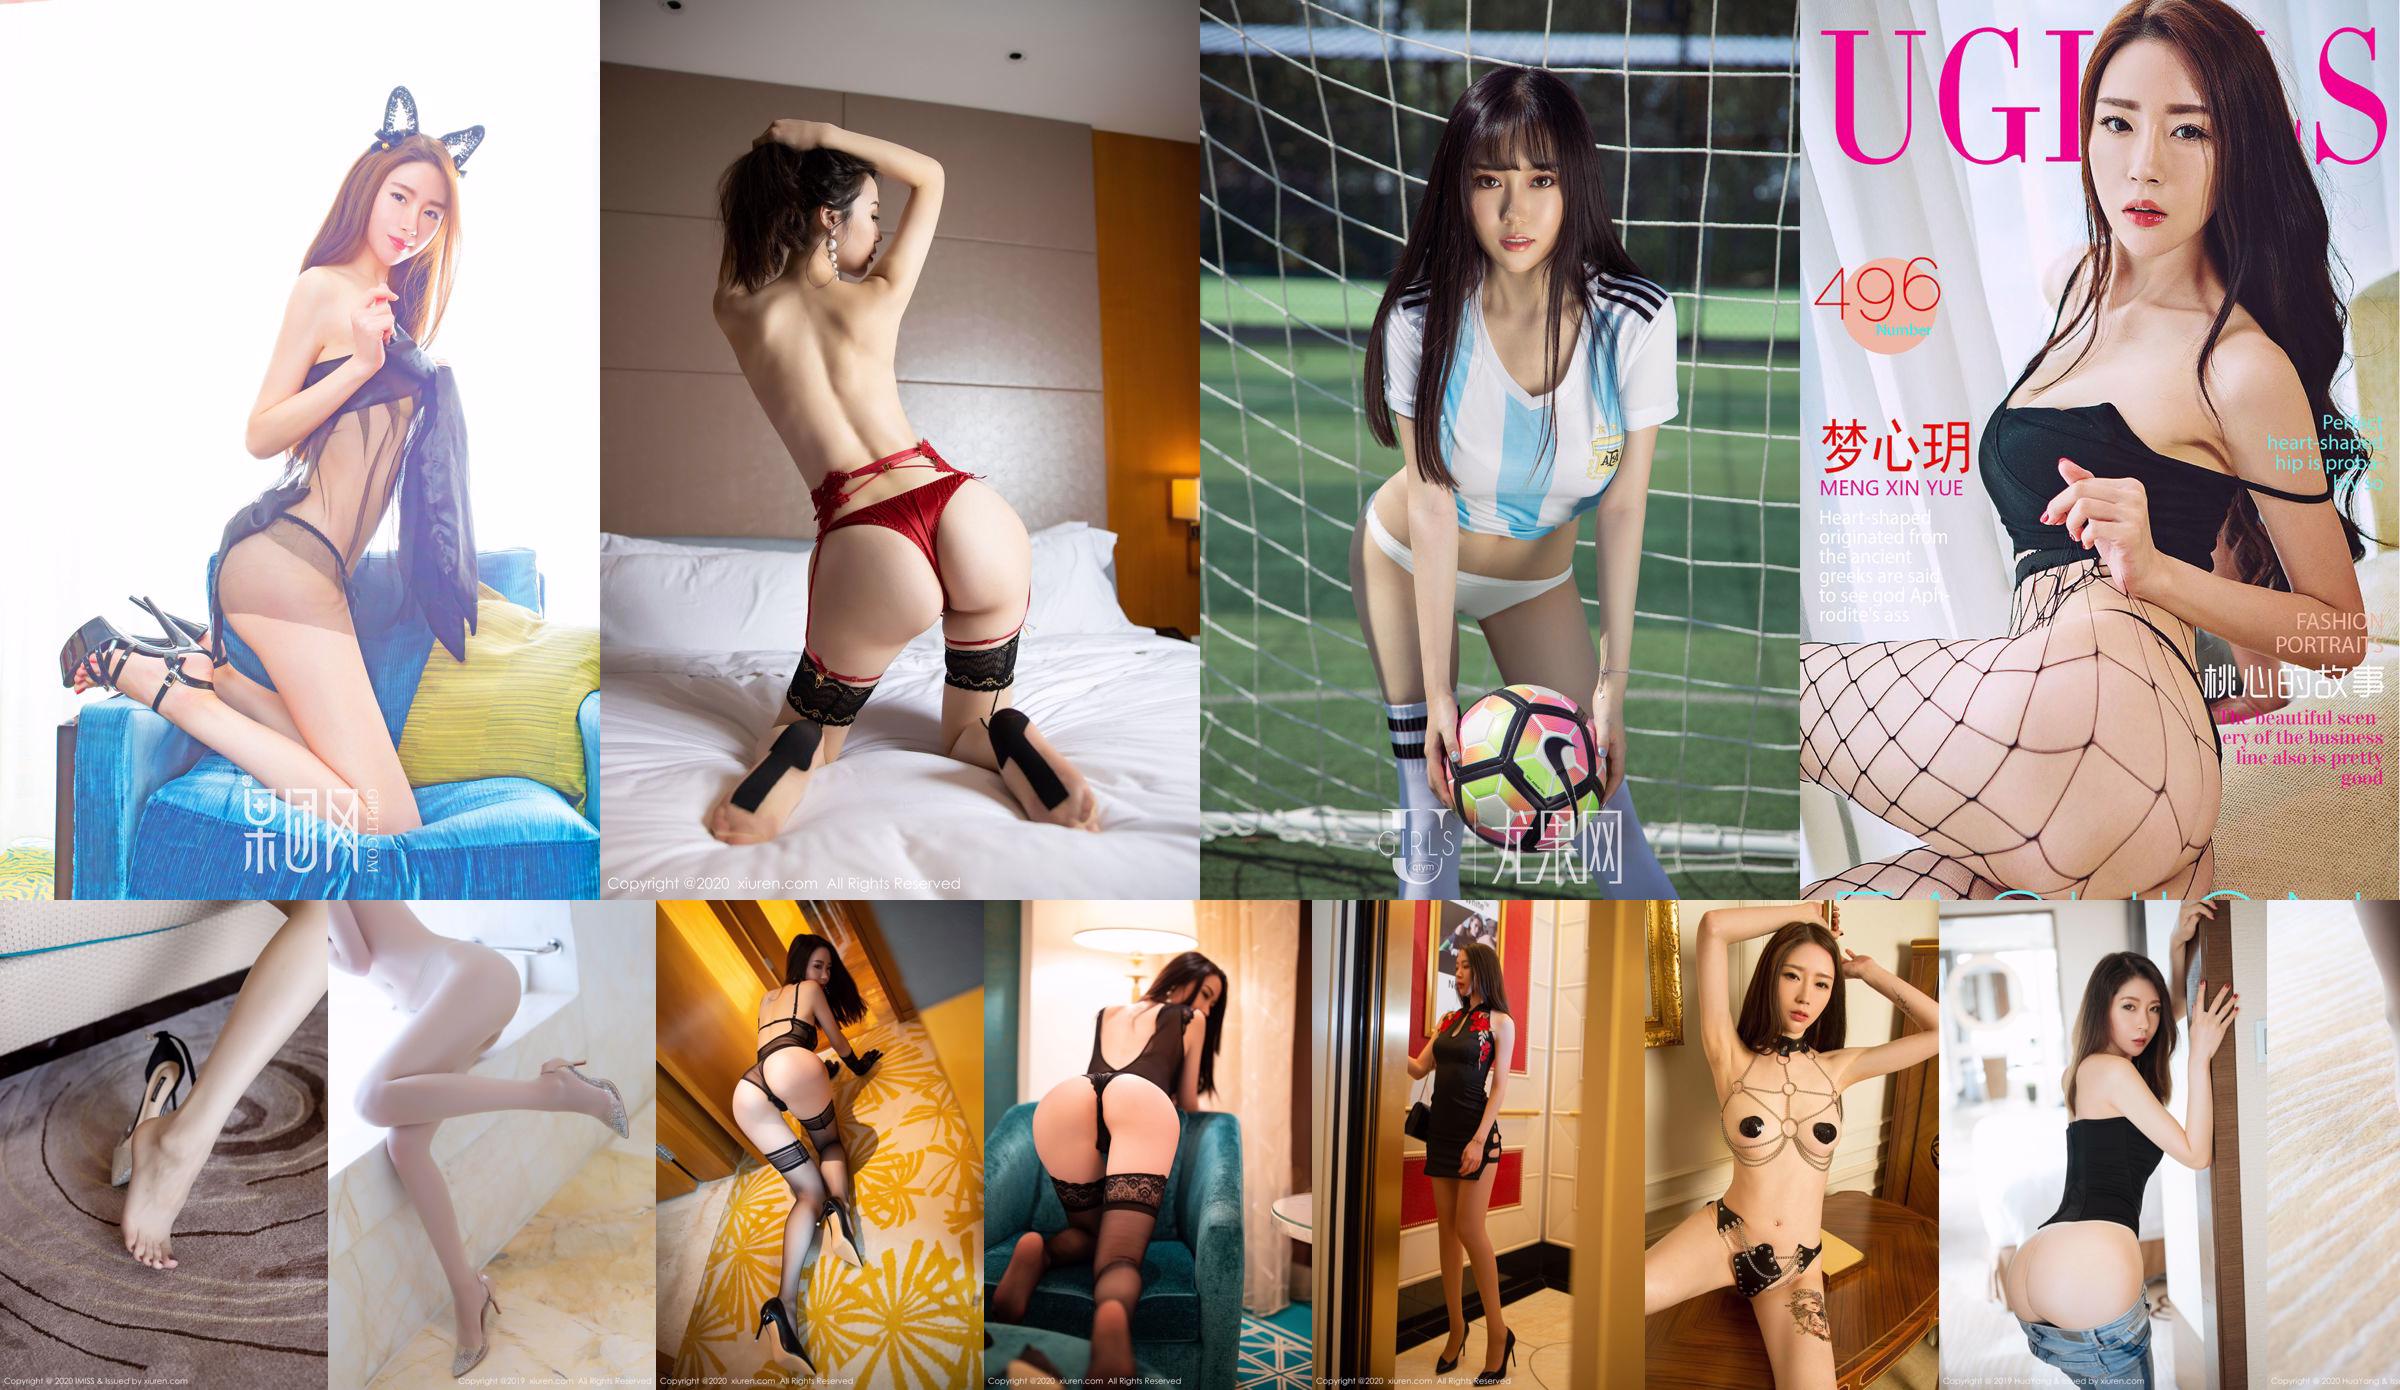 Meng Xinyue "Sexy underwear with tall figure shows legs and buttocks" [秀人XIUREN] No.1747 No.53aa82 Page 2